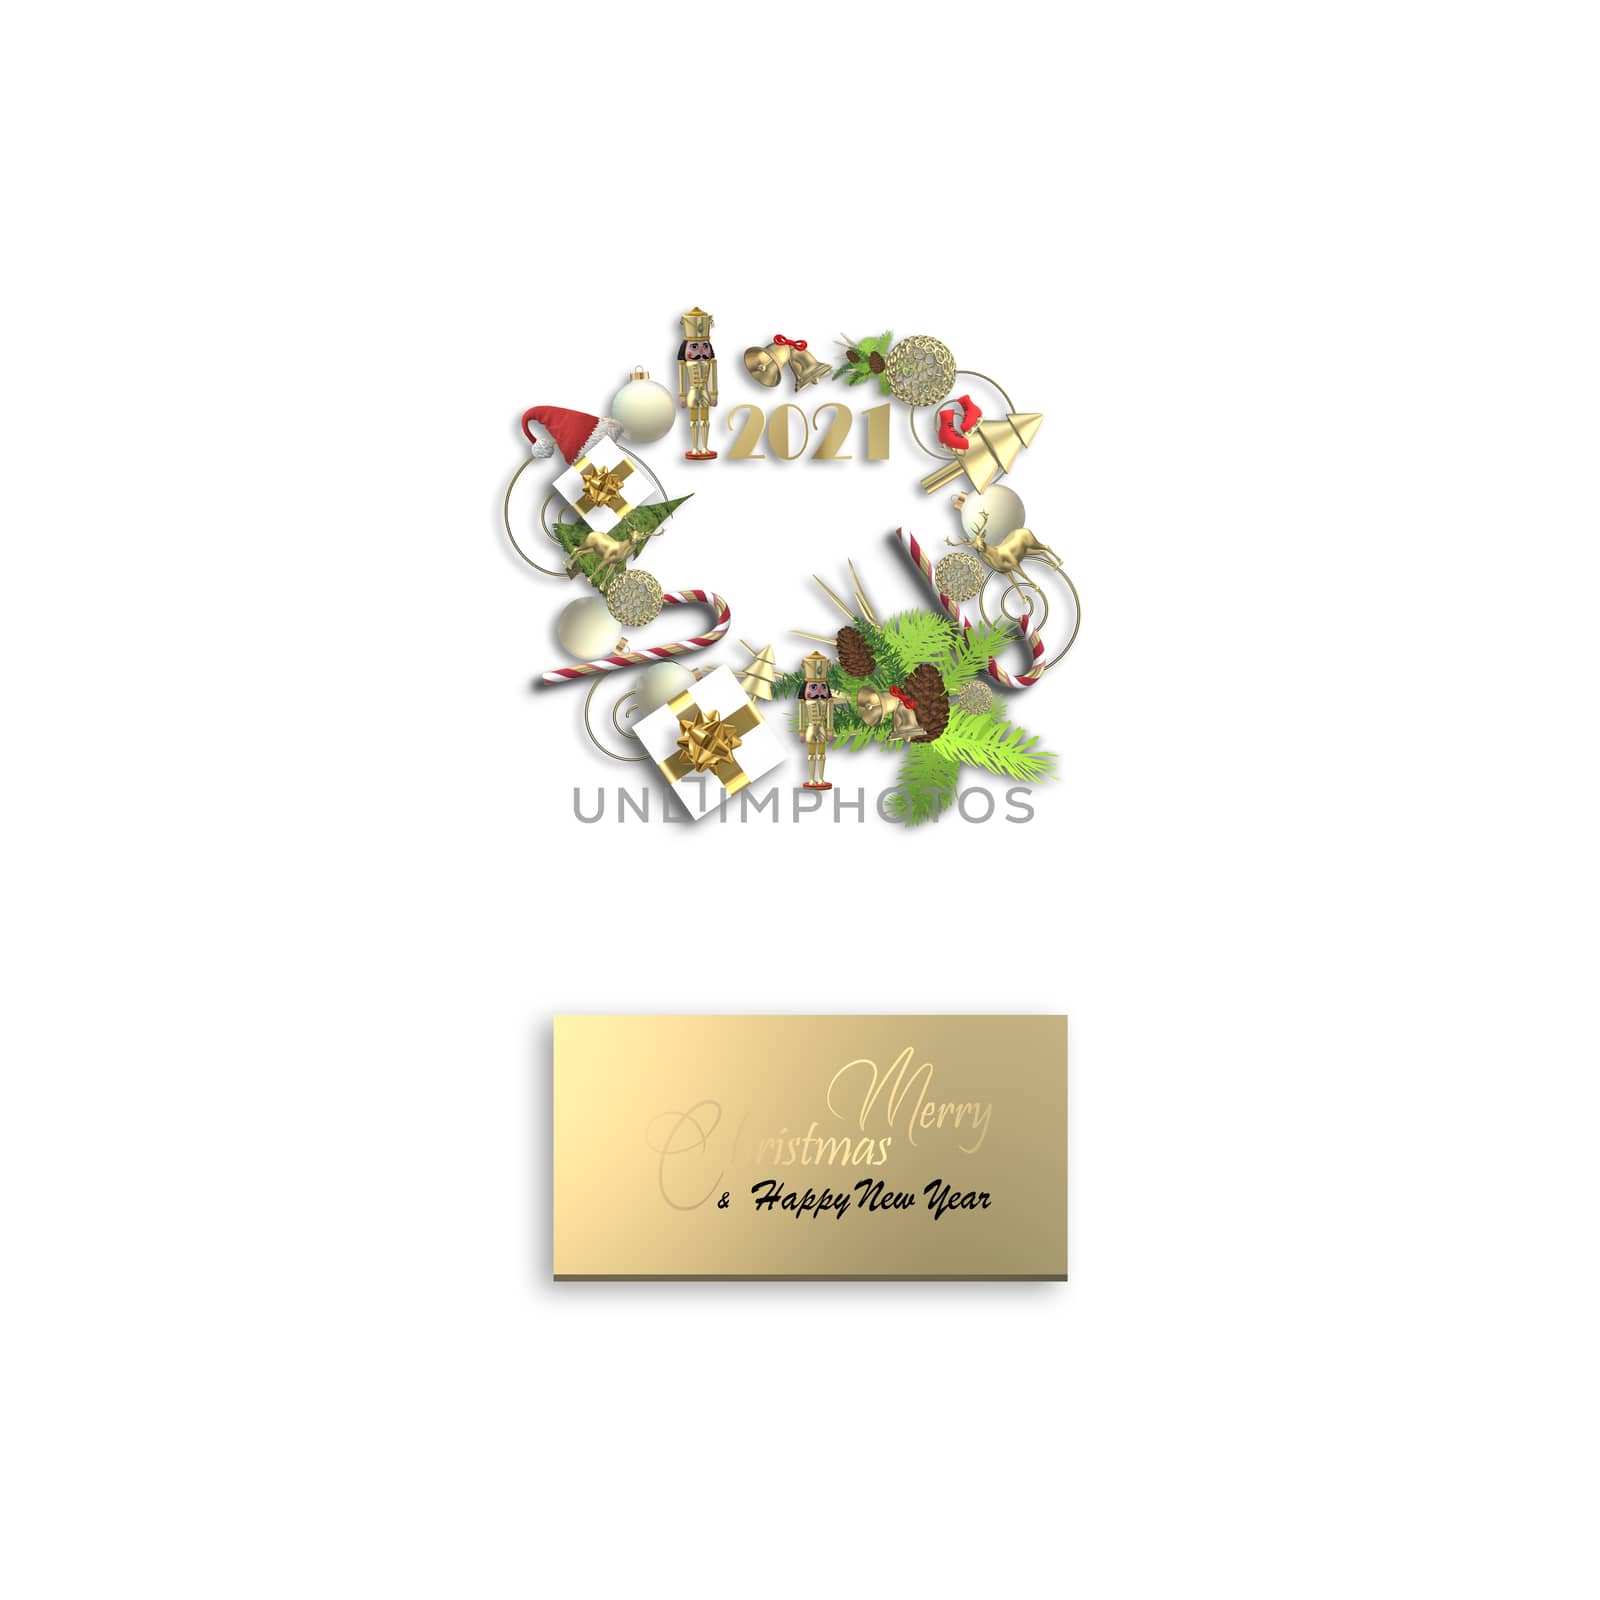 Christmas symbols design on white. Xmas symbols, text on gold gift tag Merry Christmas Happy New Year. 3D illustration. flat lay